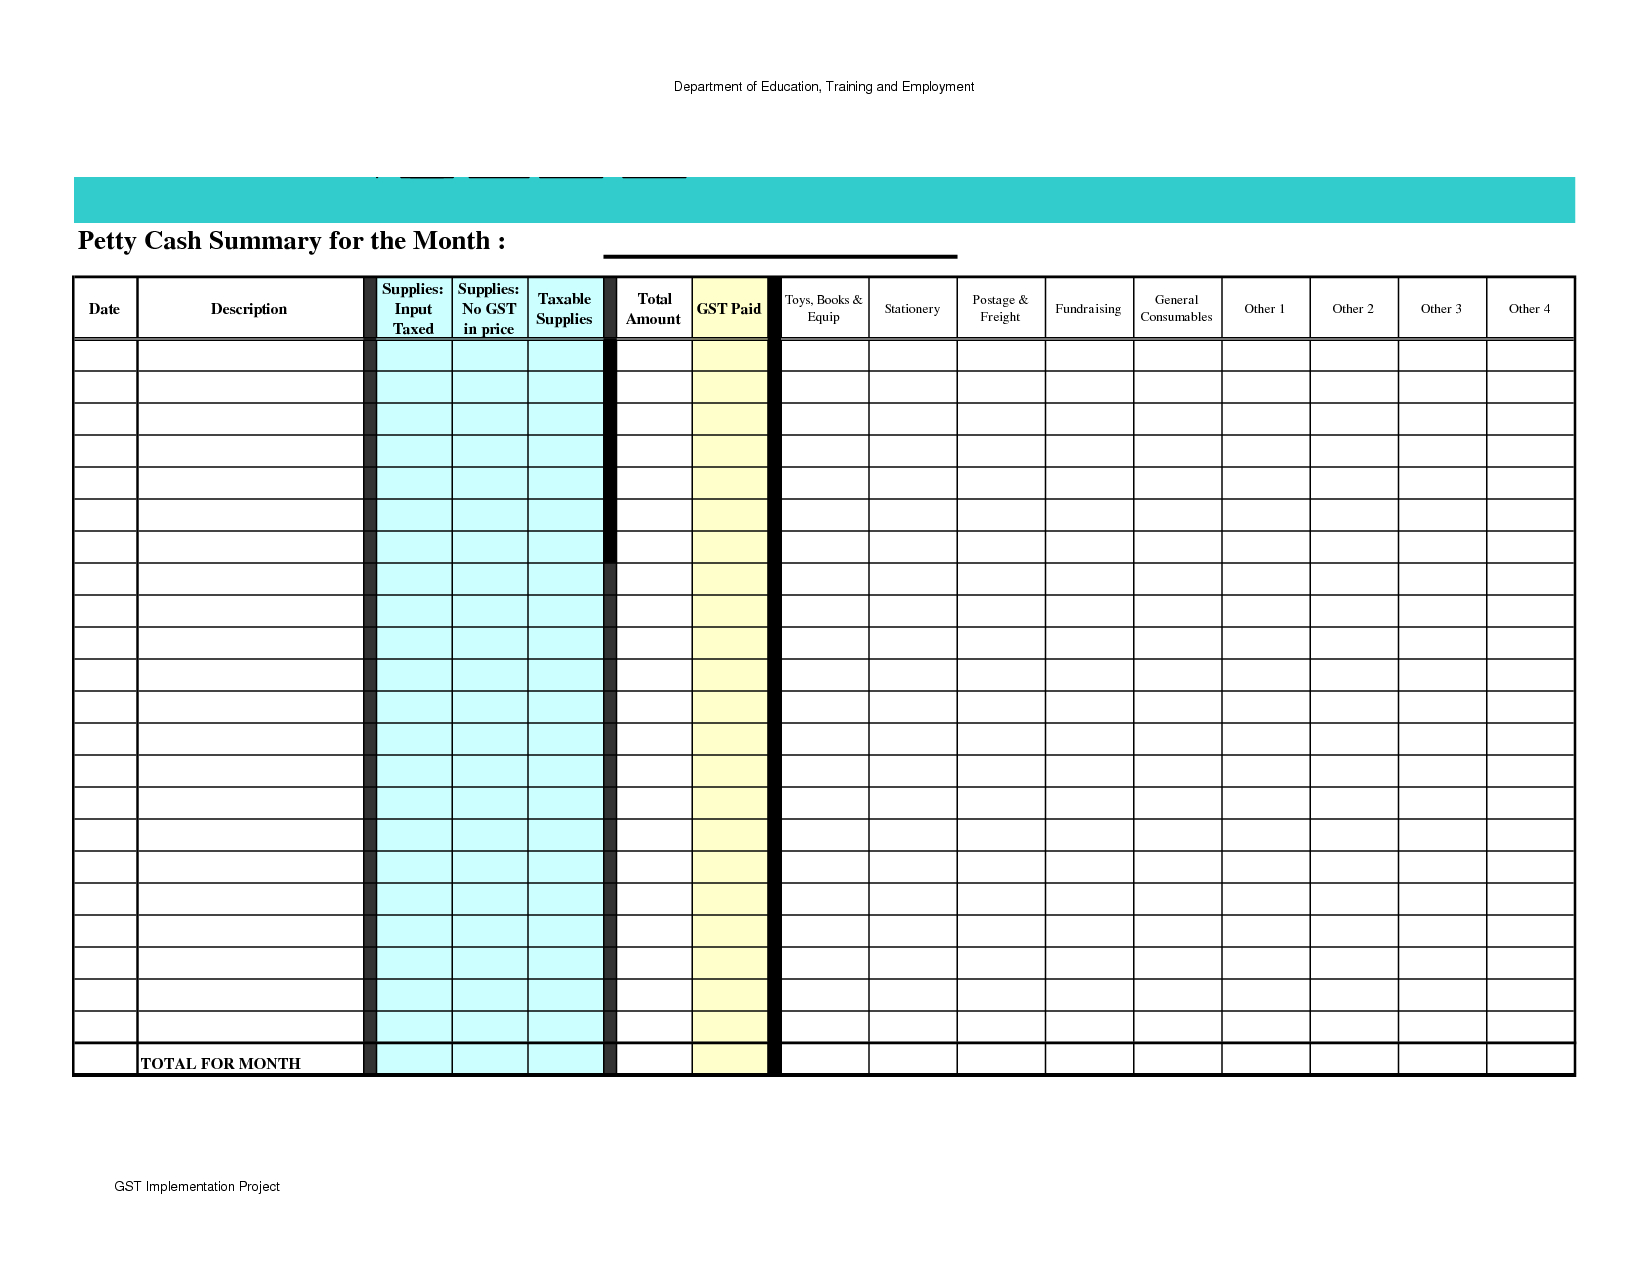 Petty Cash Spreadsheet Template Excel | Petty Cash Expences Intended For Petty Cash Expense Report Template